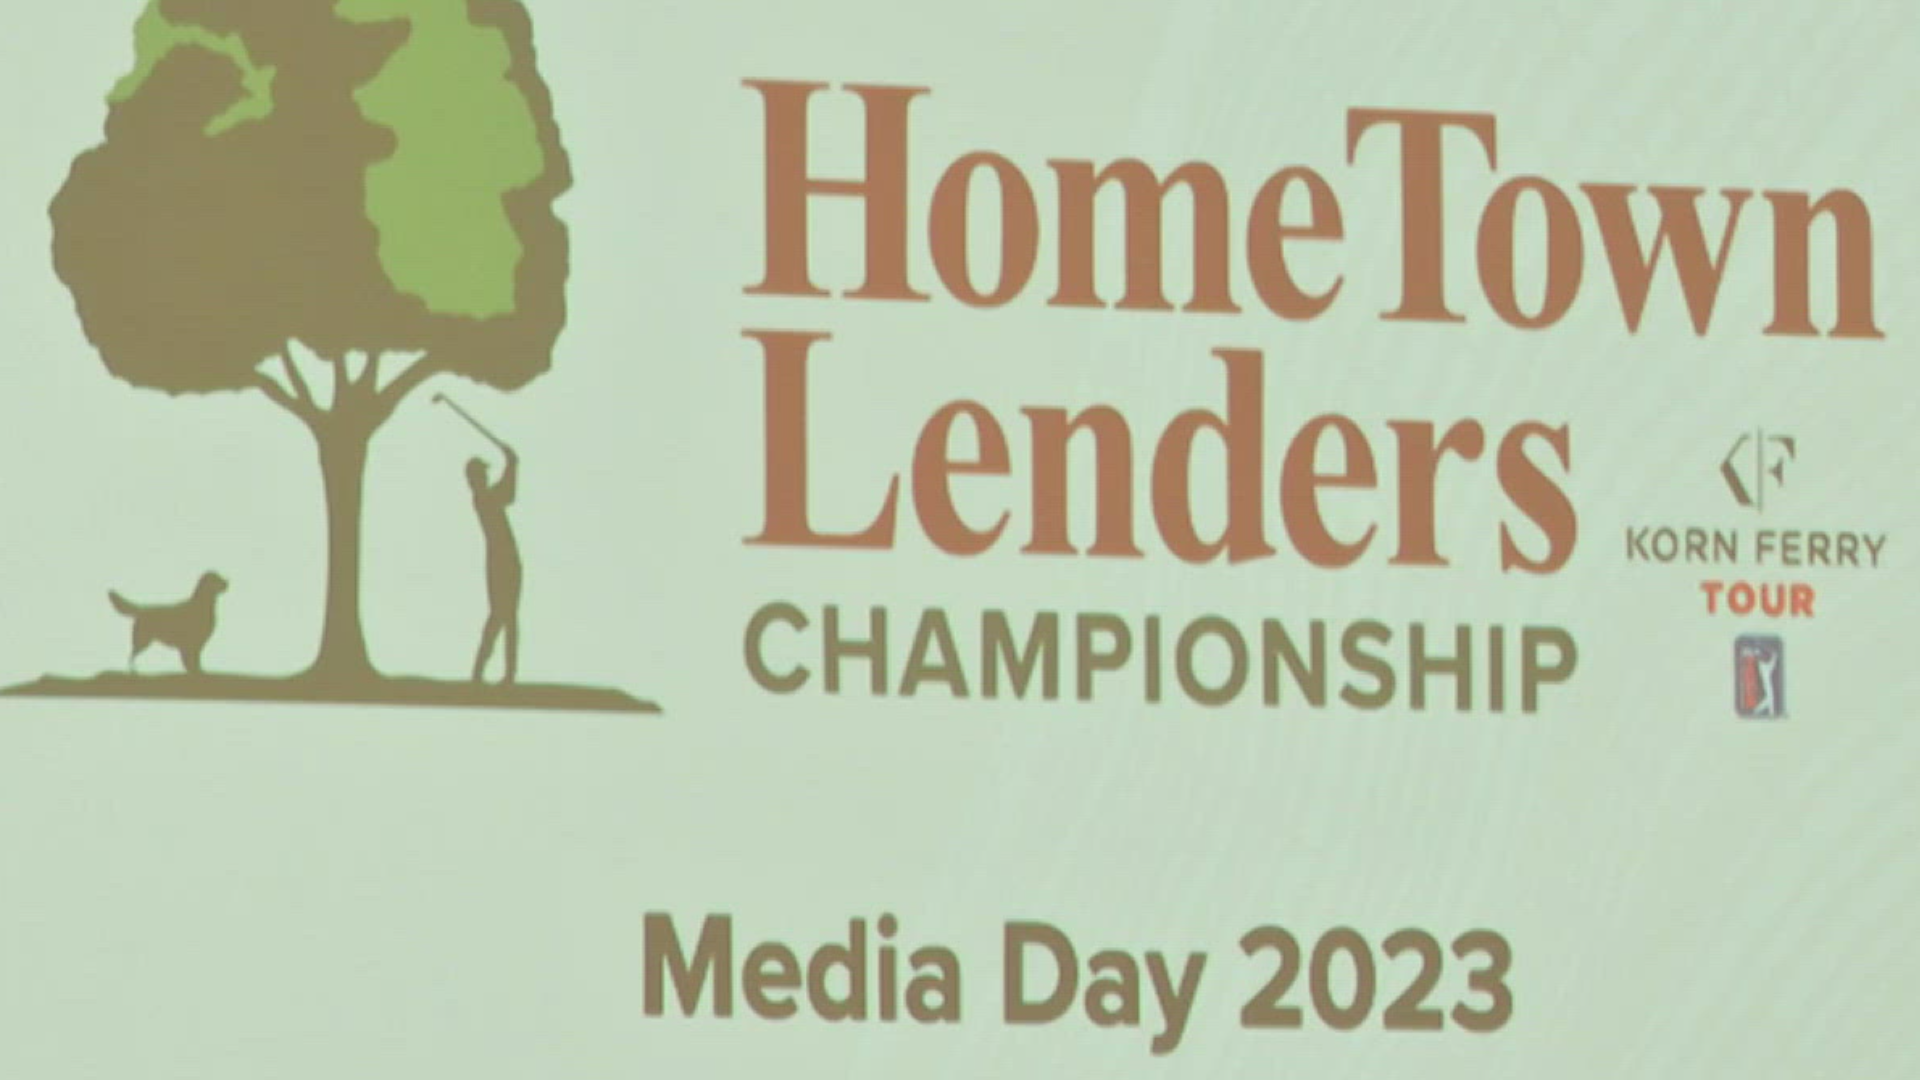 The formerly called Huntsville Championship will return to The Ledges as the "HomeTown Lenders Championship" in late April.